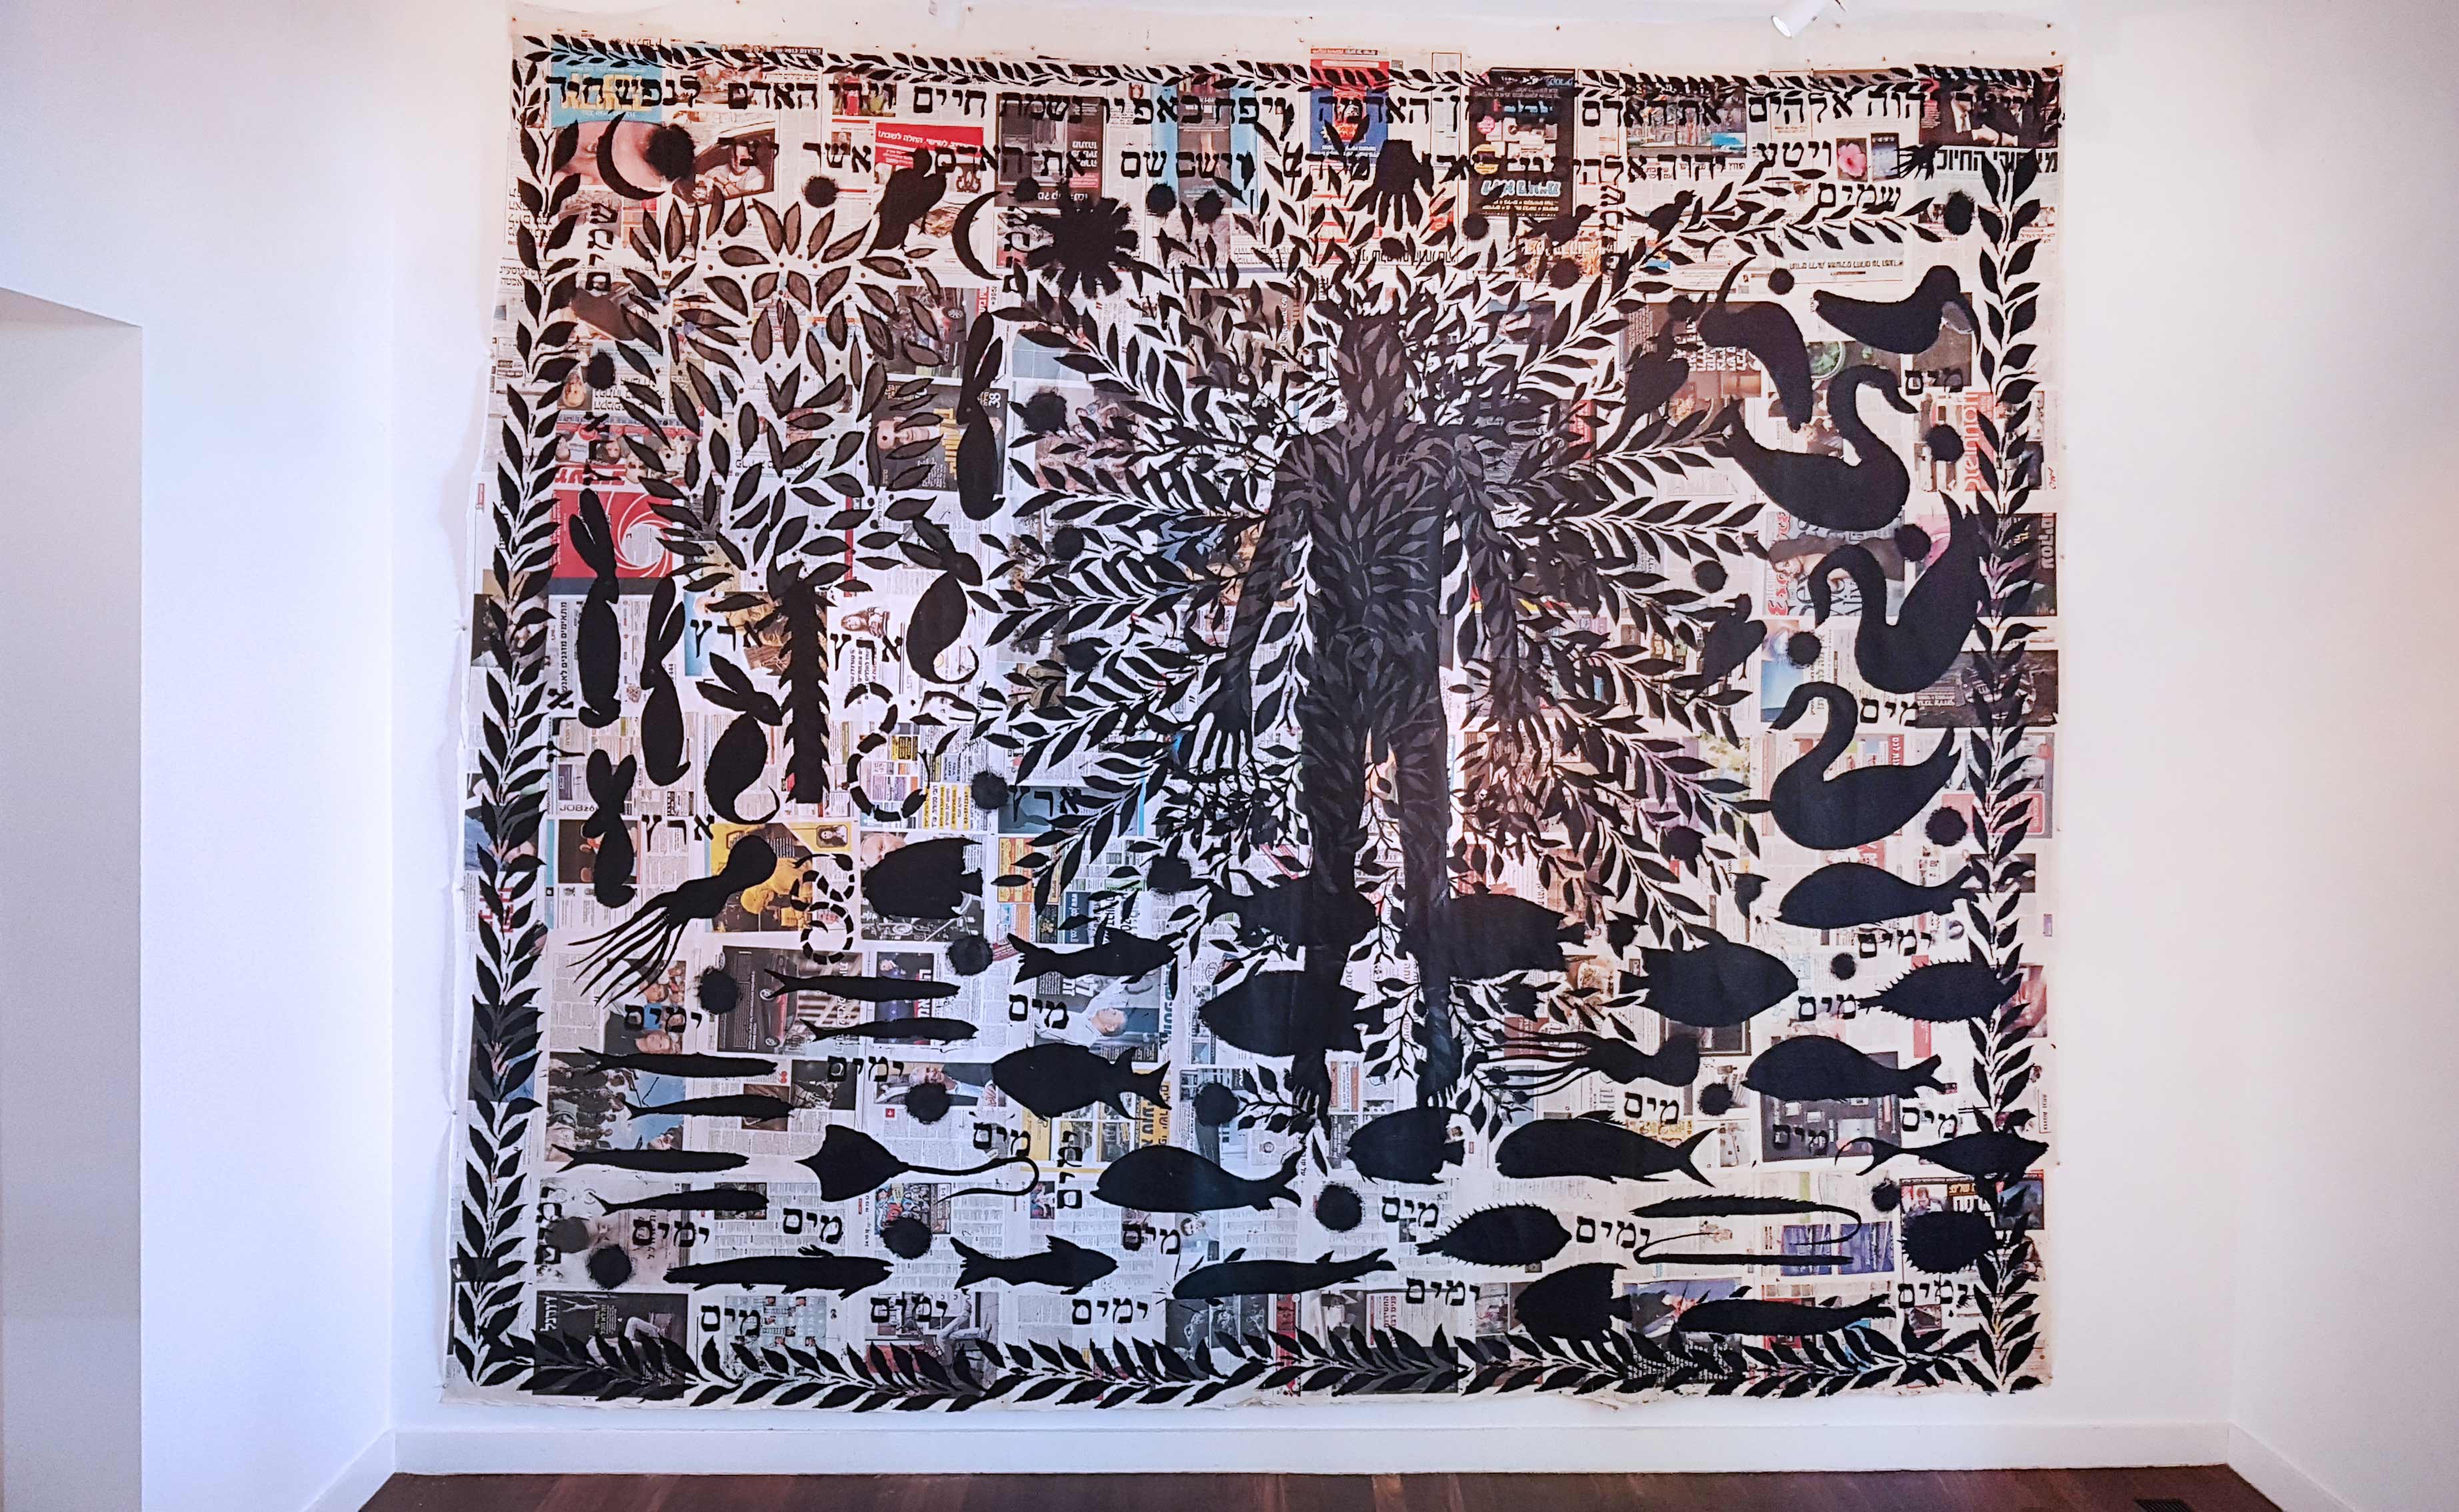 Eli Content Ode to alfred jarry UBU roi 2019 acryl olie mixed media op linnen 107 x 59 cm